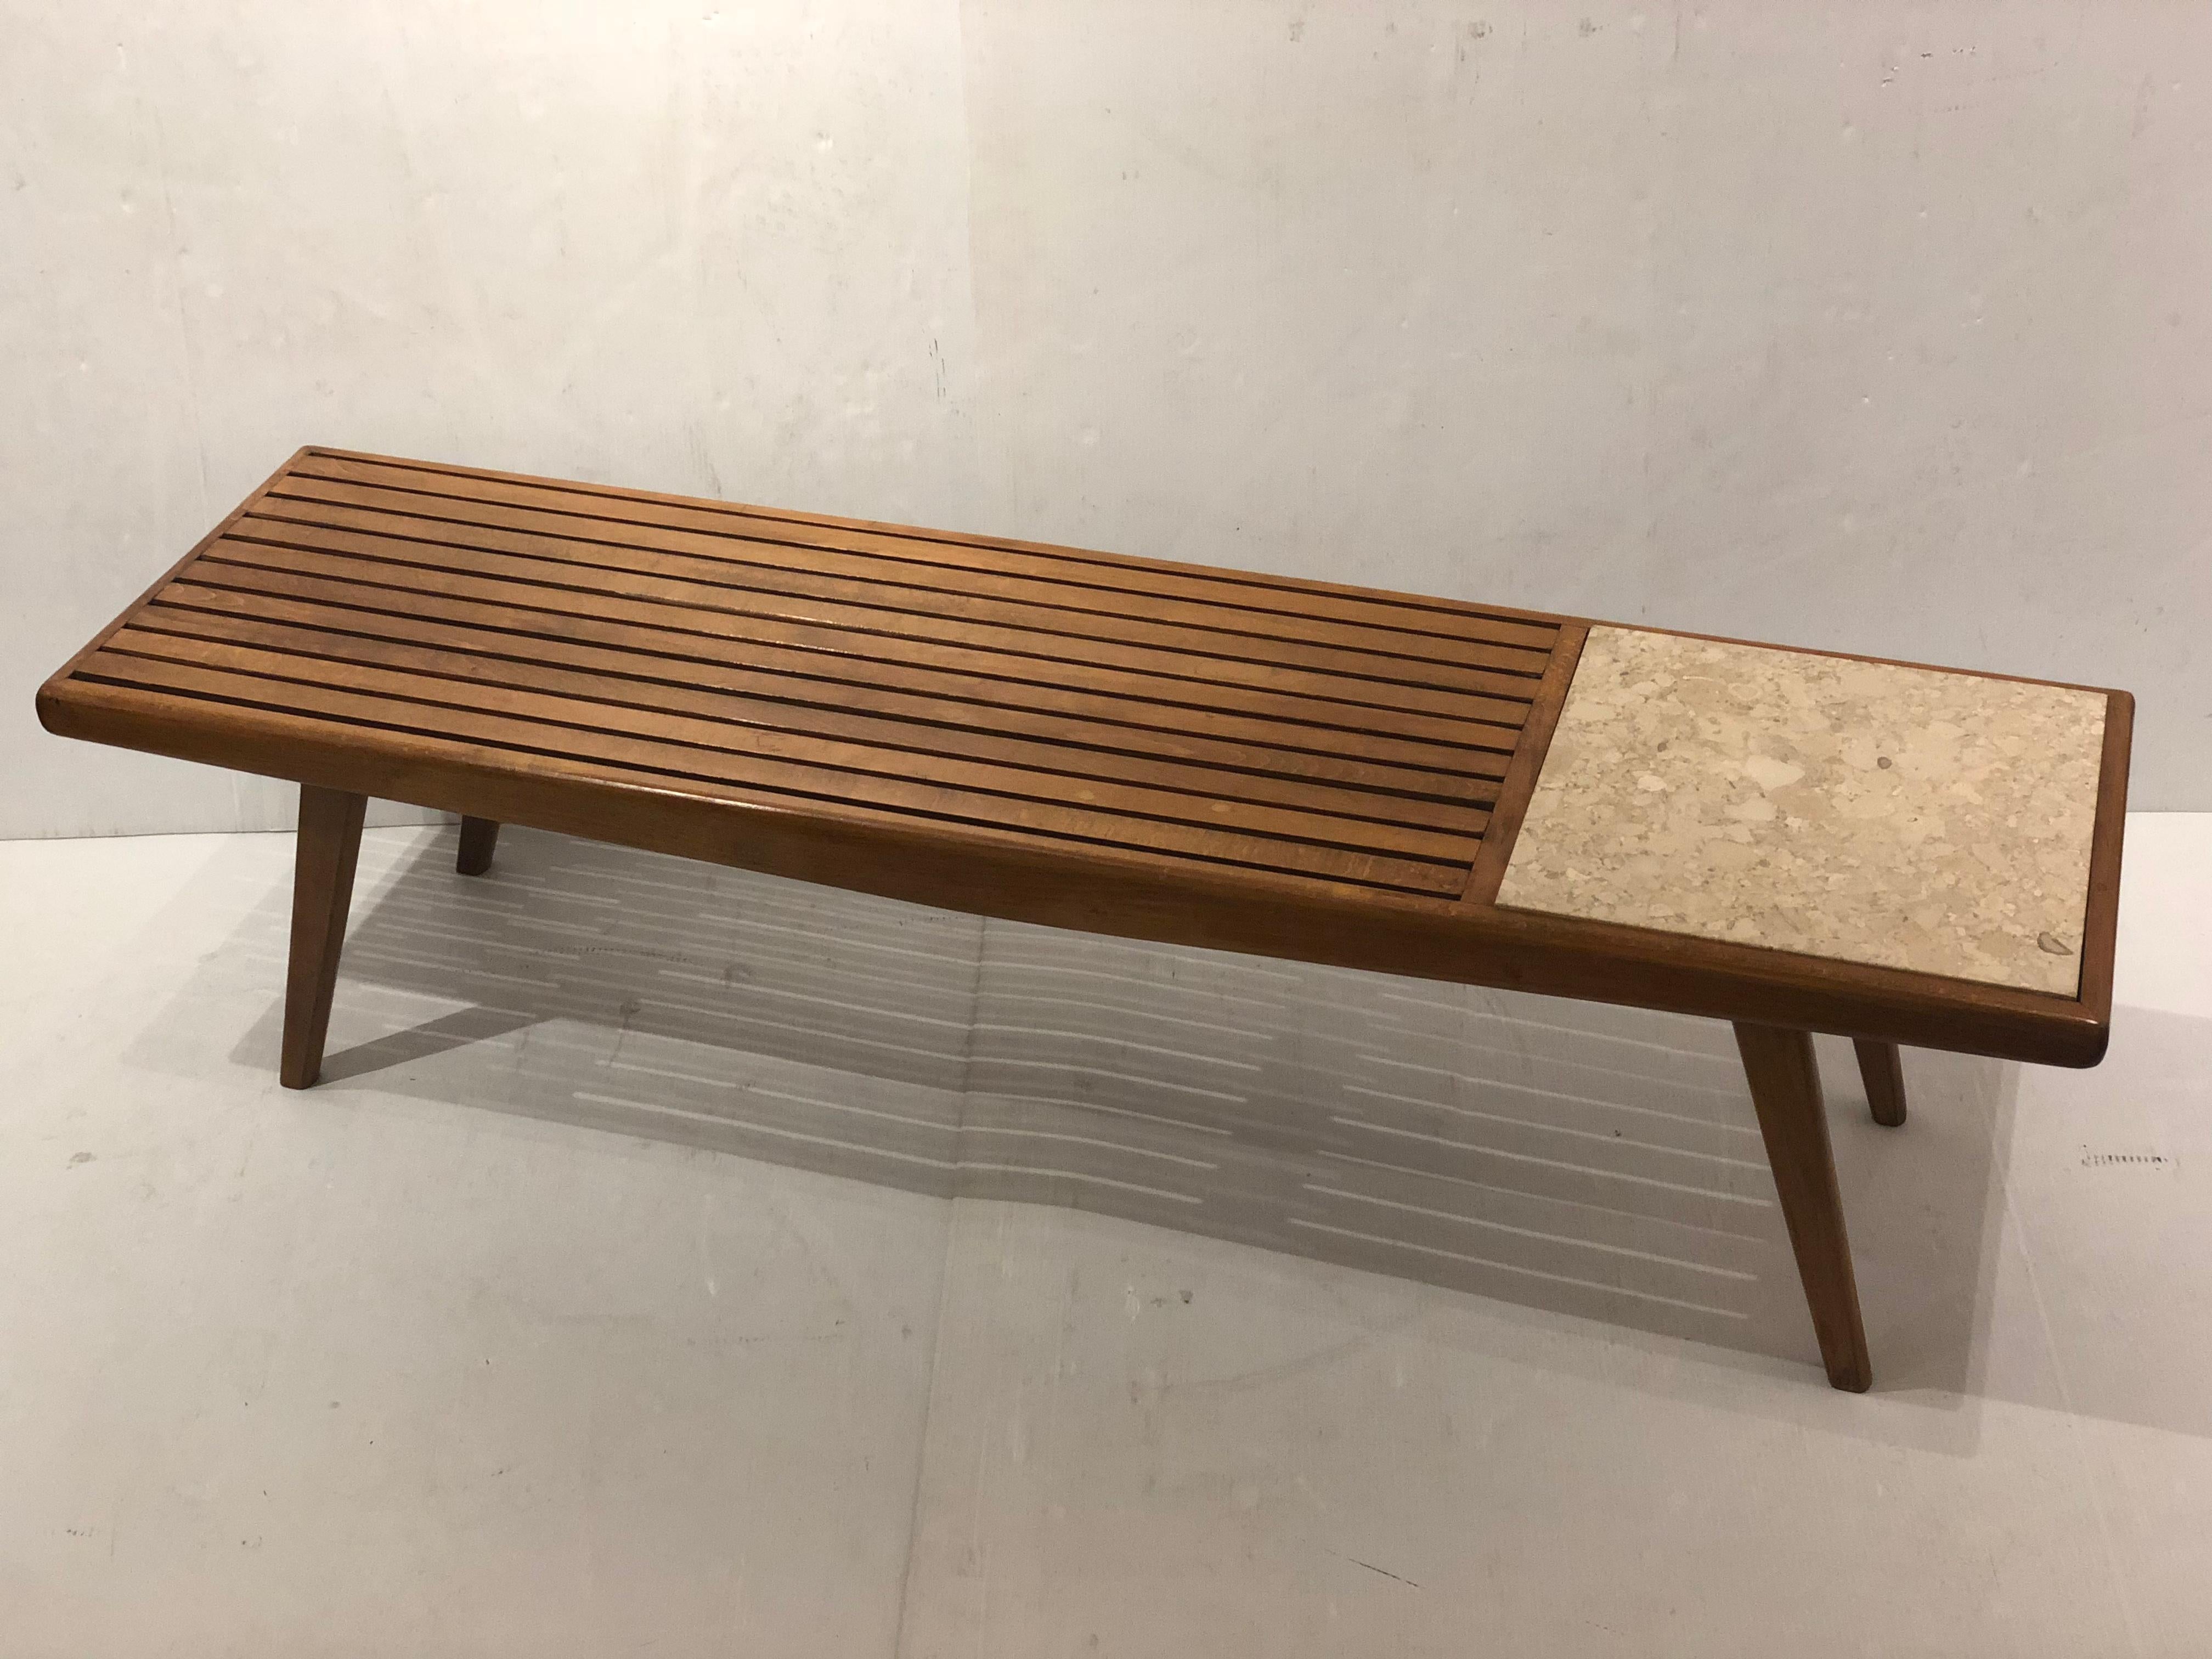 Elegant Japanese style small slat bench, circa 1950s, in light walnut finish. The piece is solid and sturdy with angle legs and solid marble insert. can be used for seating or as small coffee table. Retains its original walnut finish wich its very